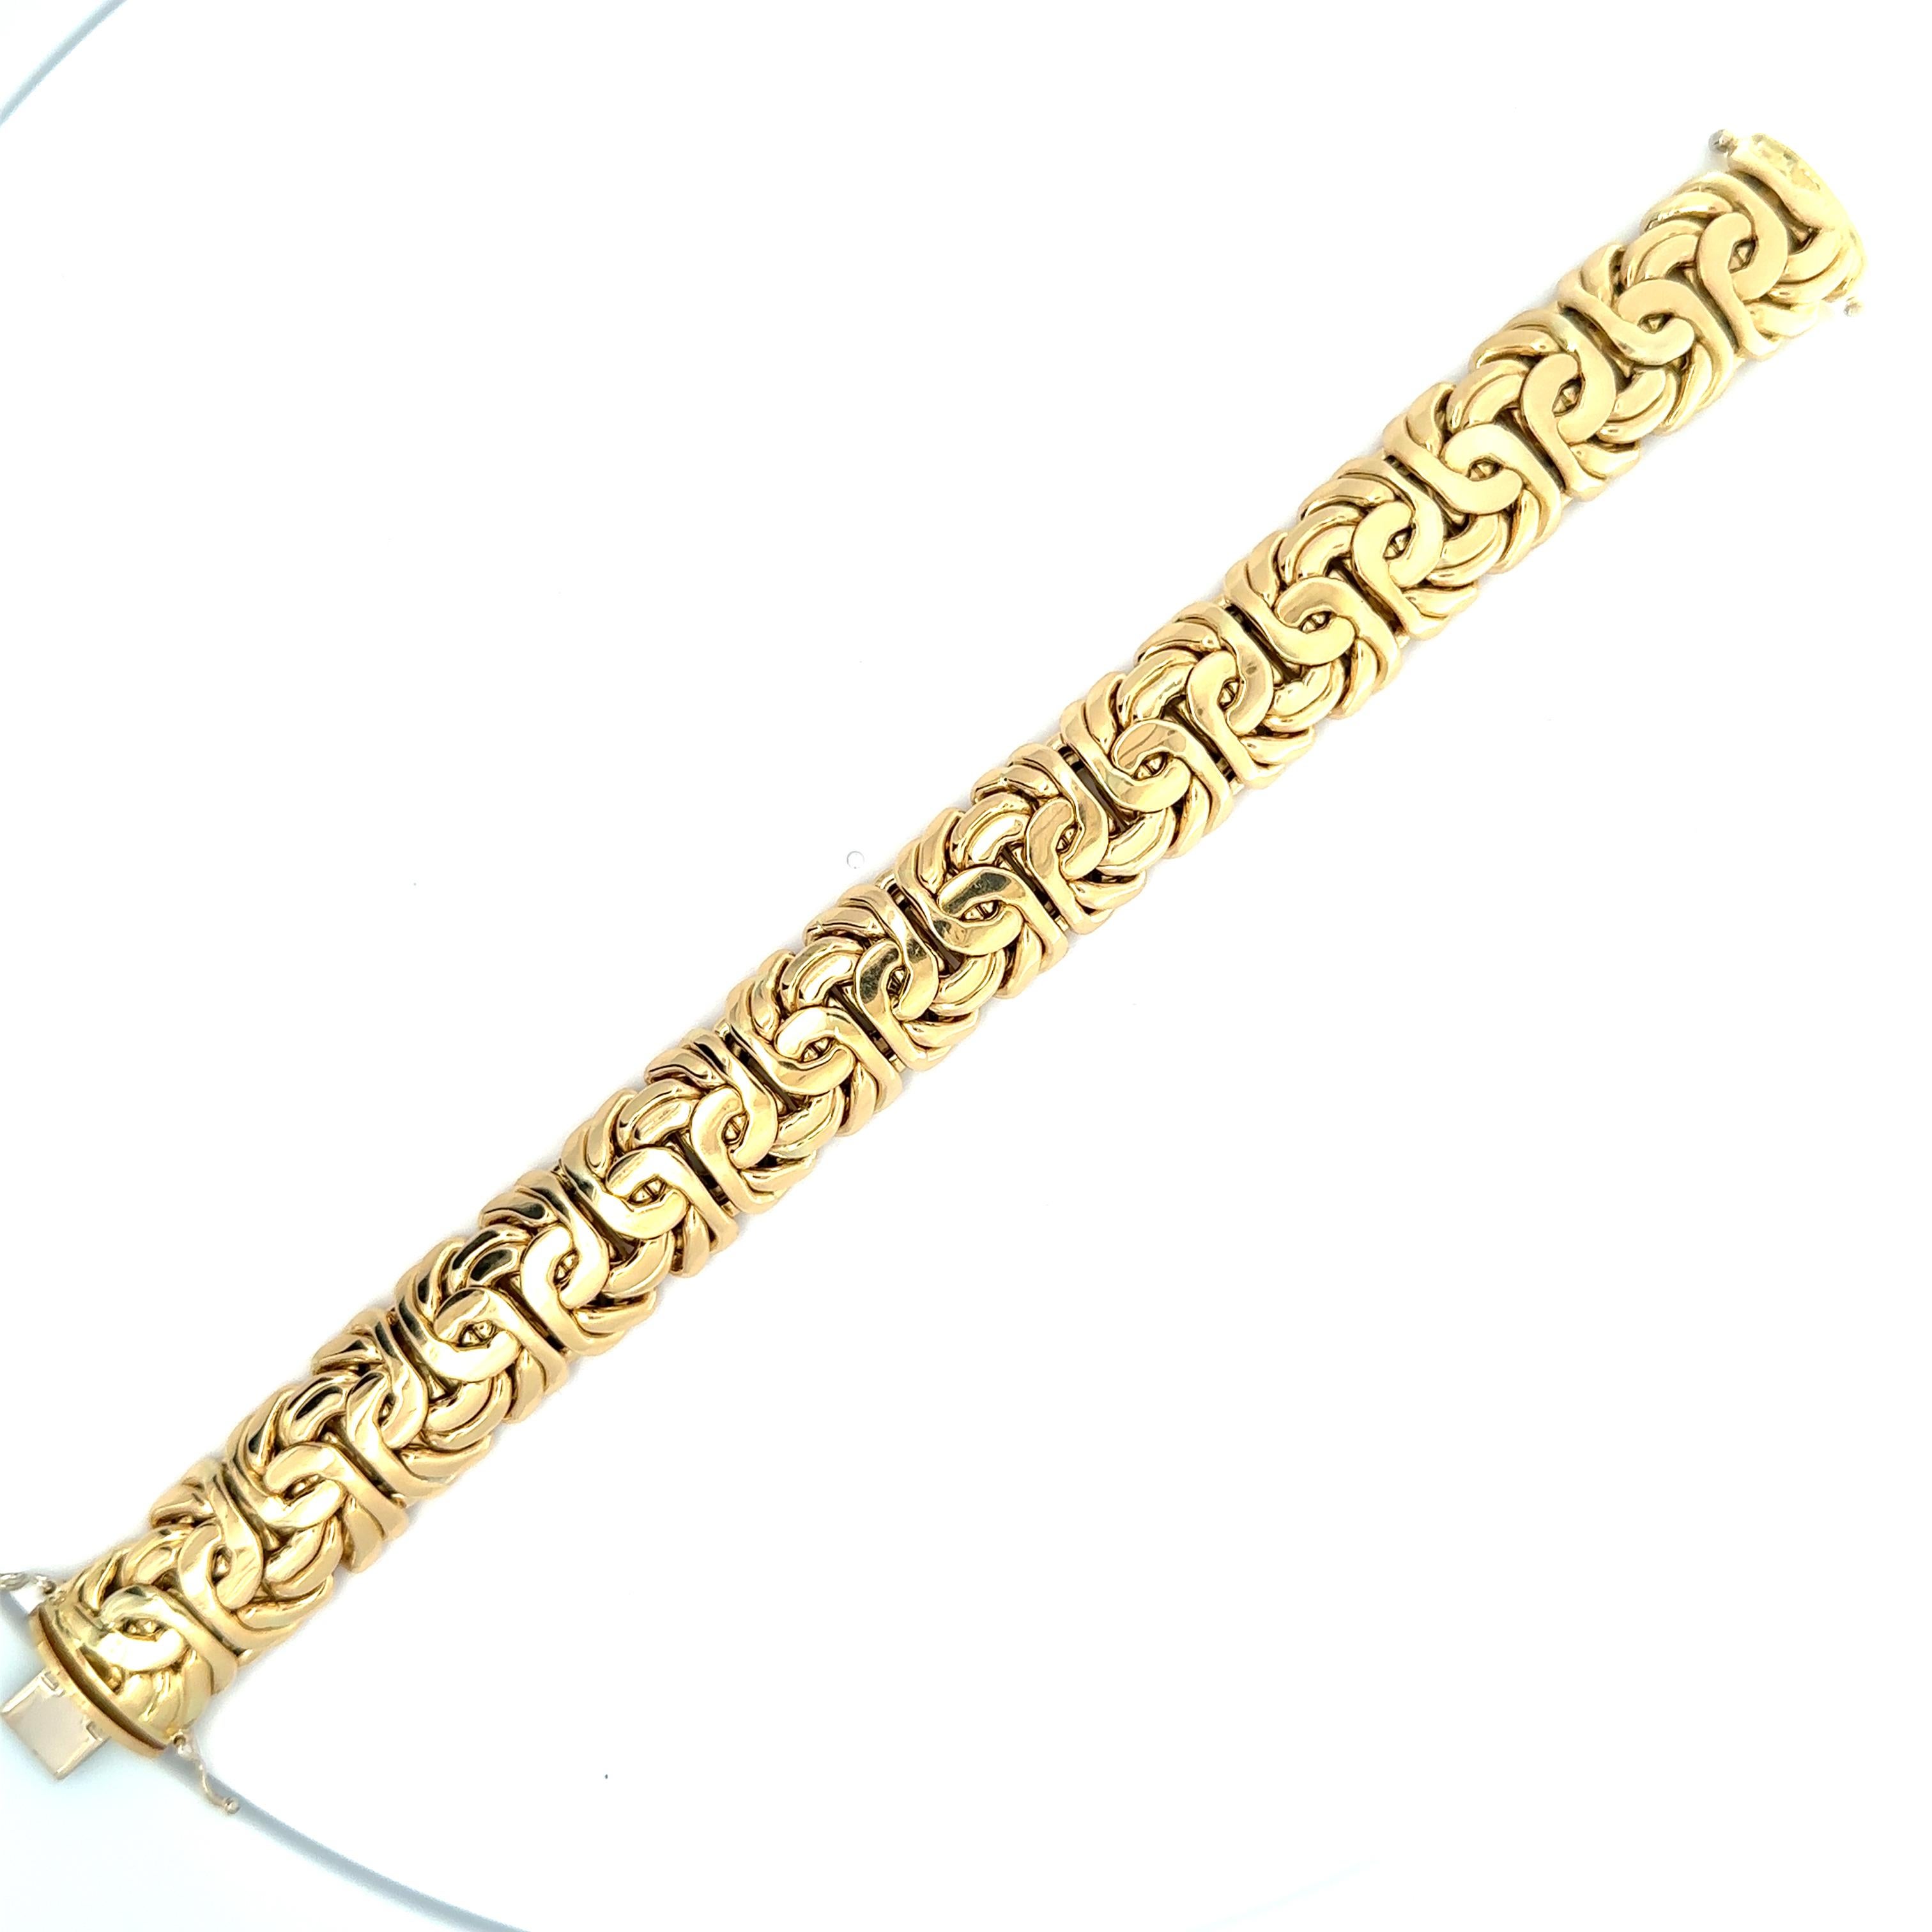 Material: Solid 18k Yellow Gold
Weight: 61.19 Grams
Chain Type: 6.6mm Byzantine Polished Link
Bracelet Length: Will comfortably fit up to a 7.5 inch wrist (fitted on a wrist)
Chain Width: 17.1mm (0.67